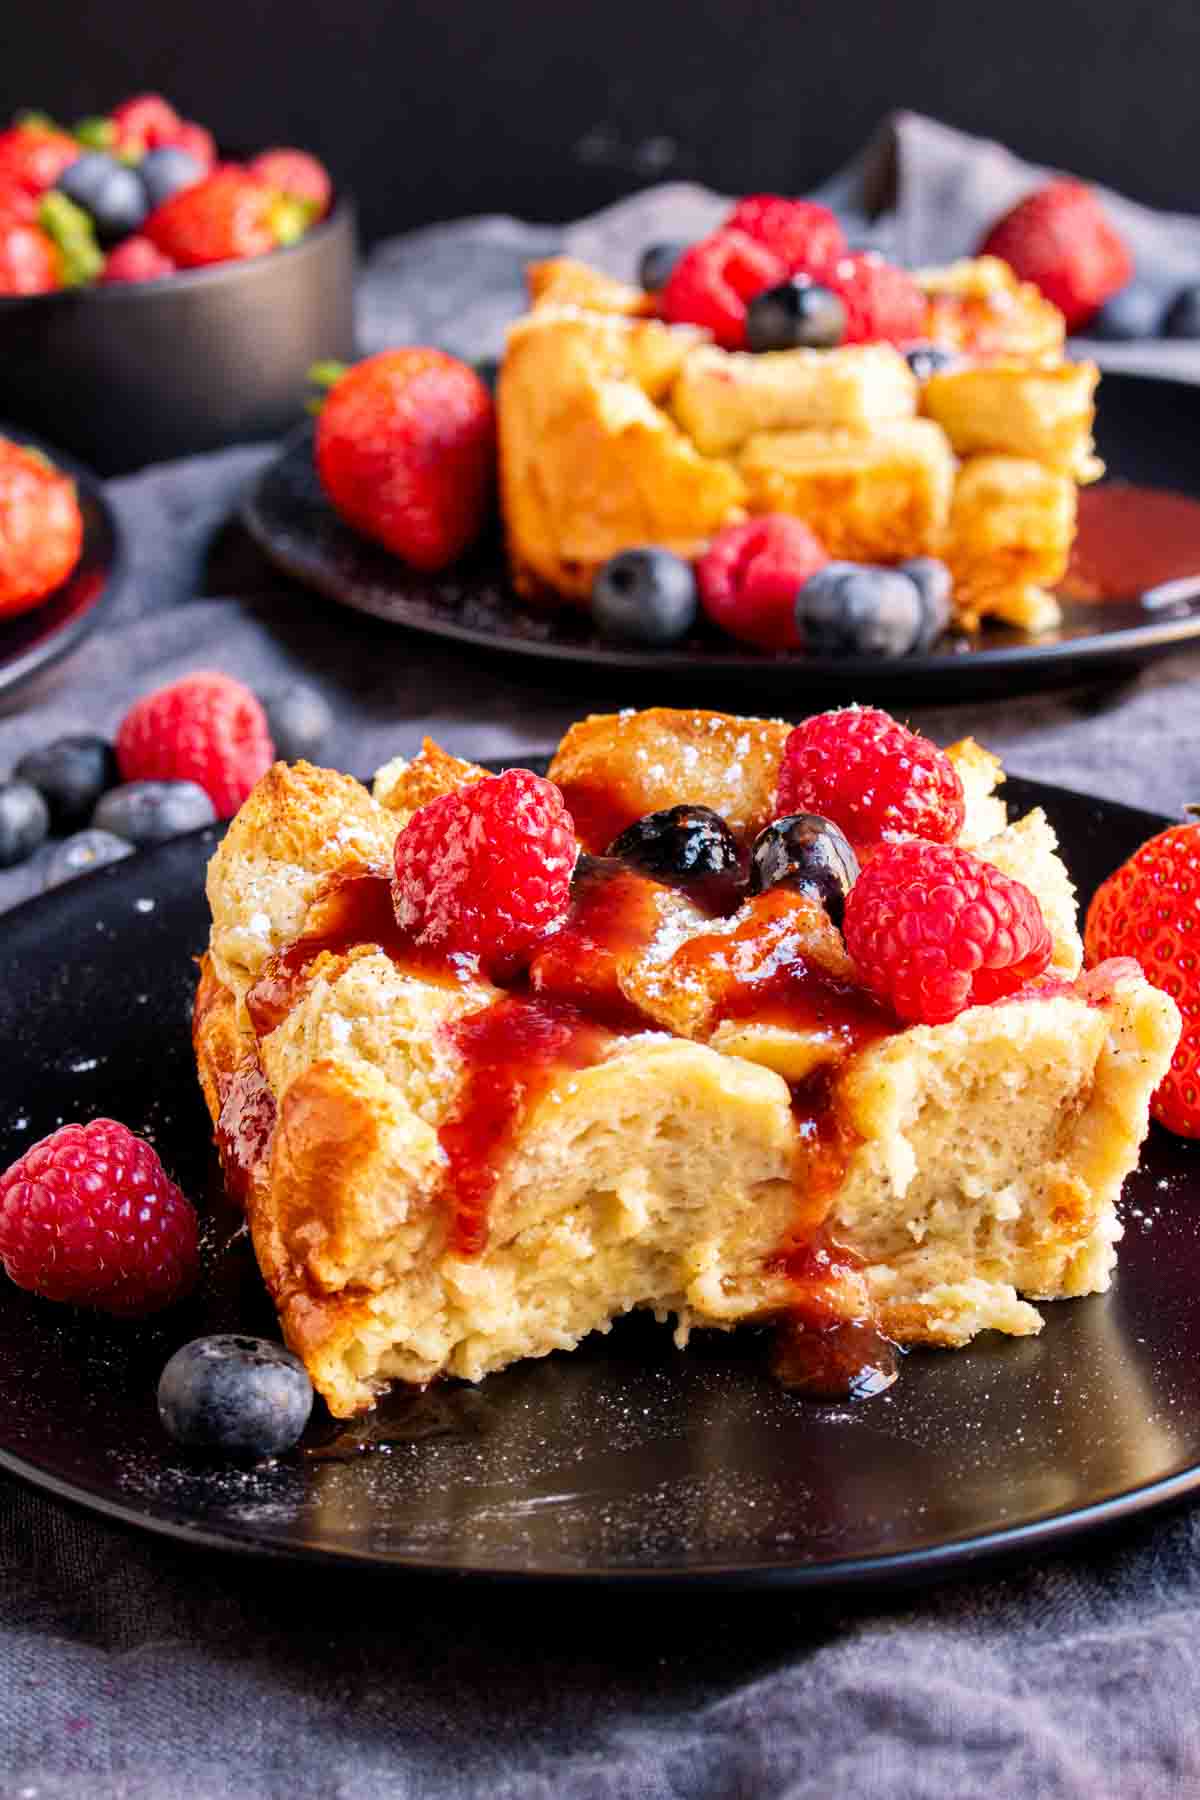 A slice of Overnight French Toast Bake with berries and syrup on a plate.